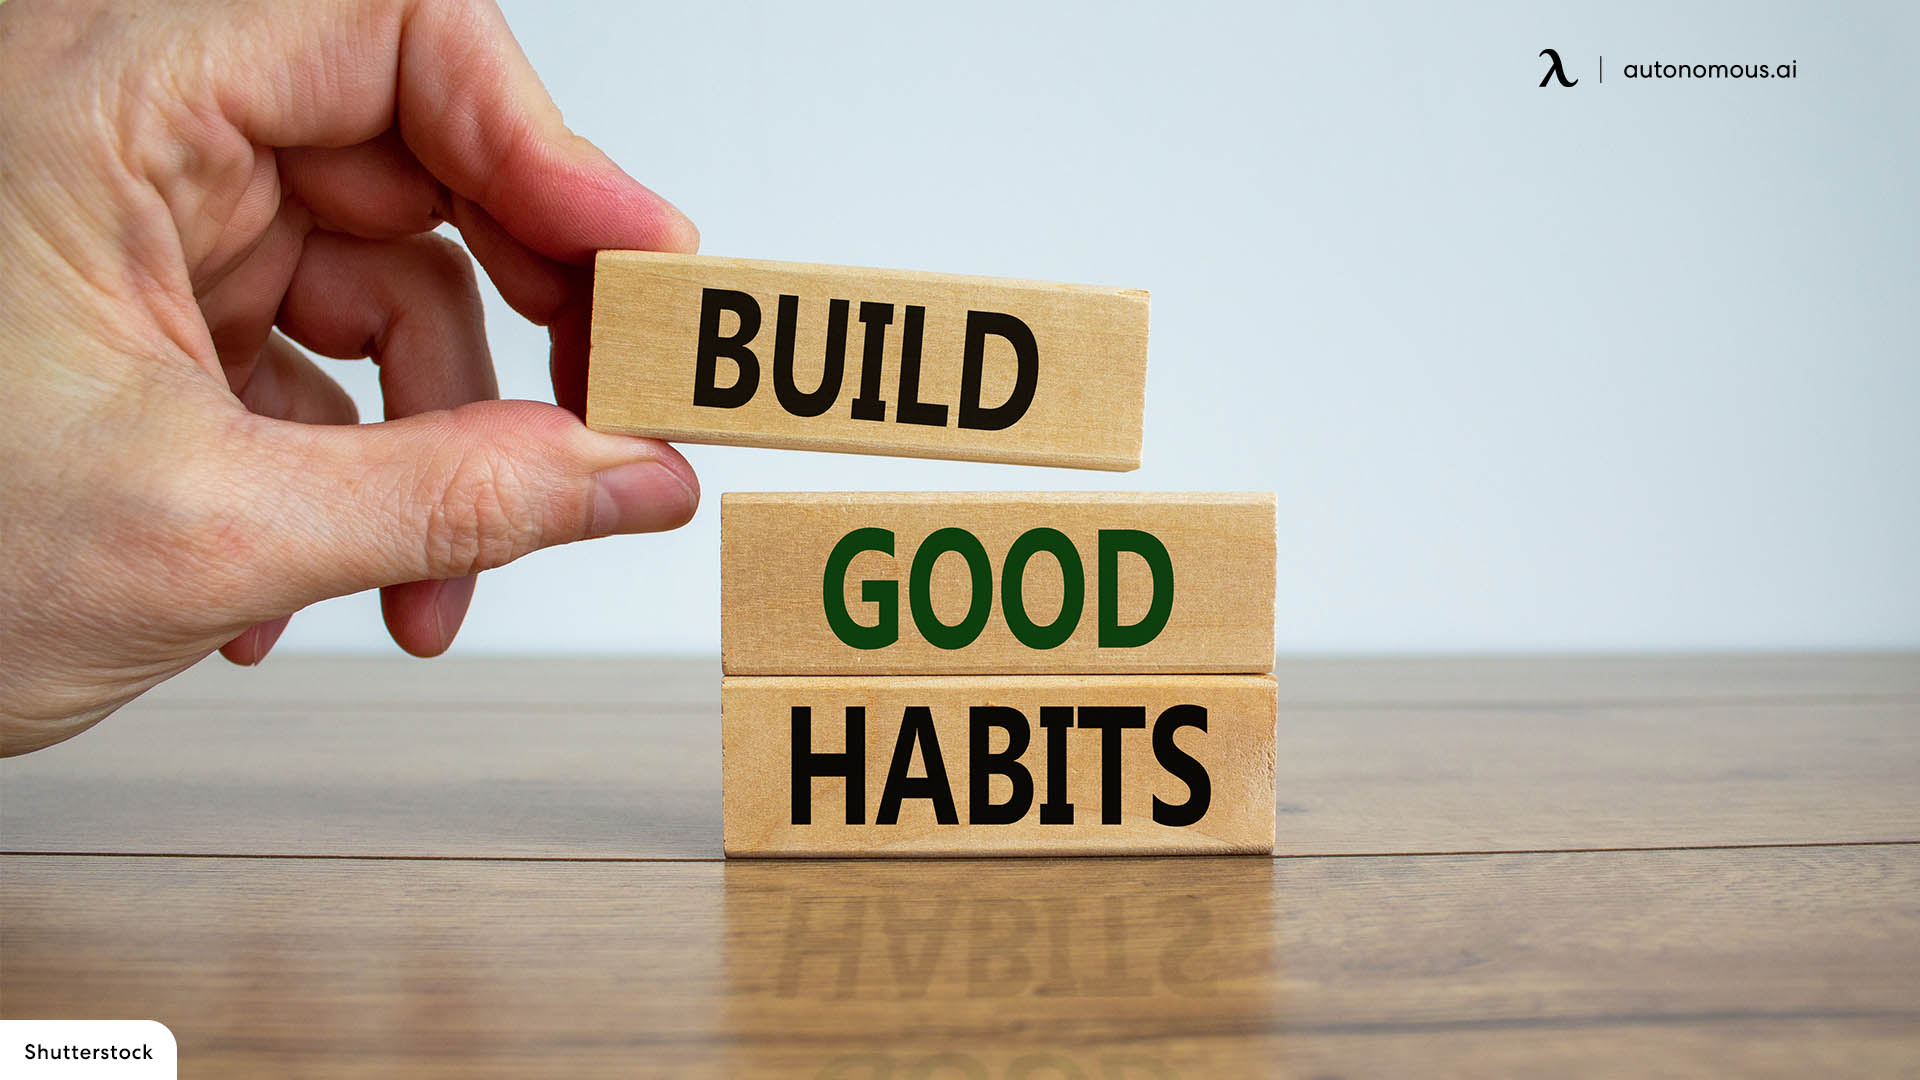 How Many Days to Create a Good Habit?